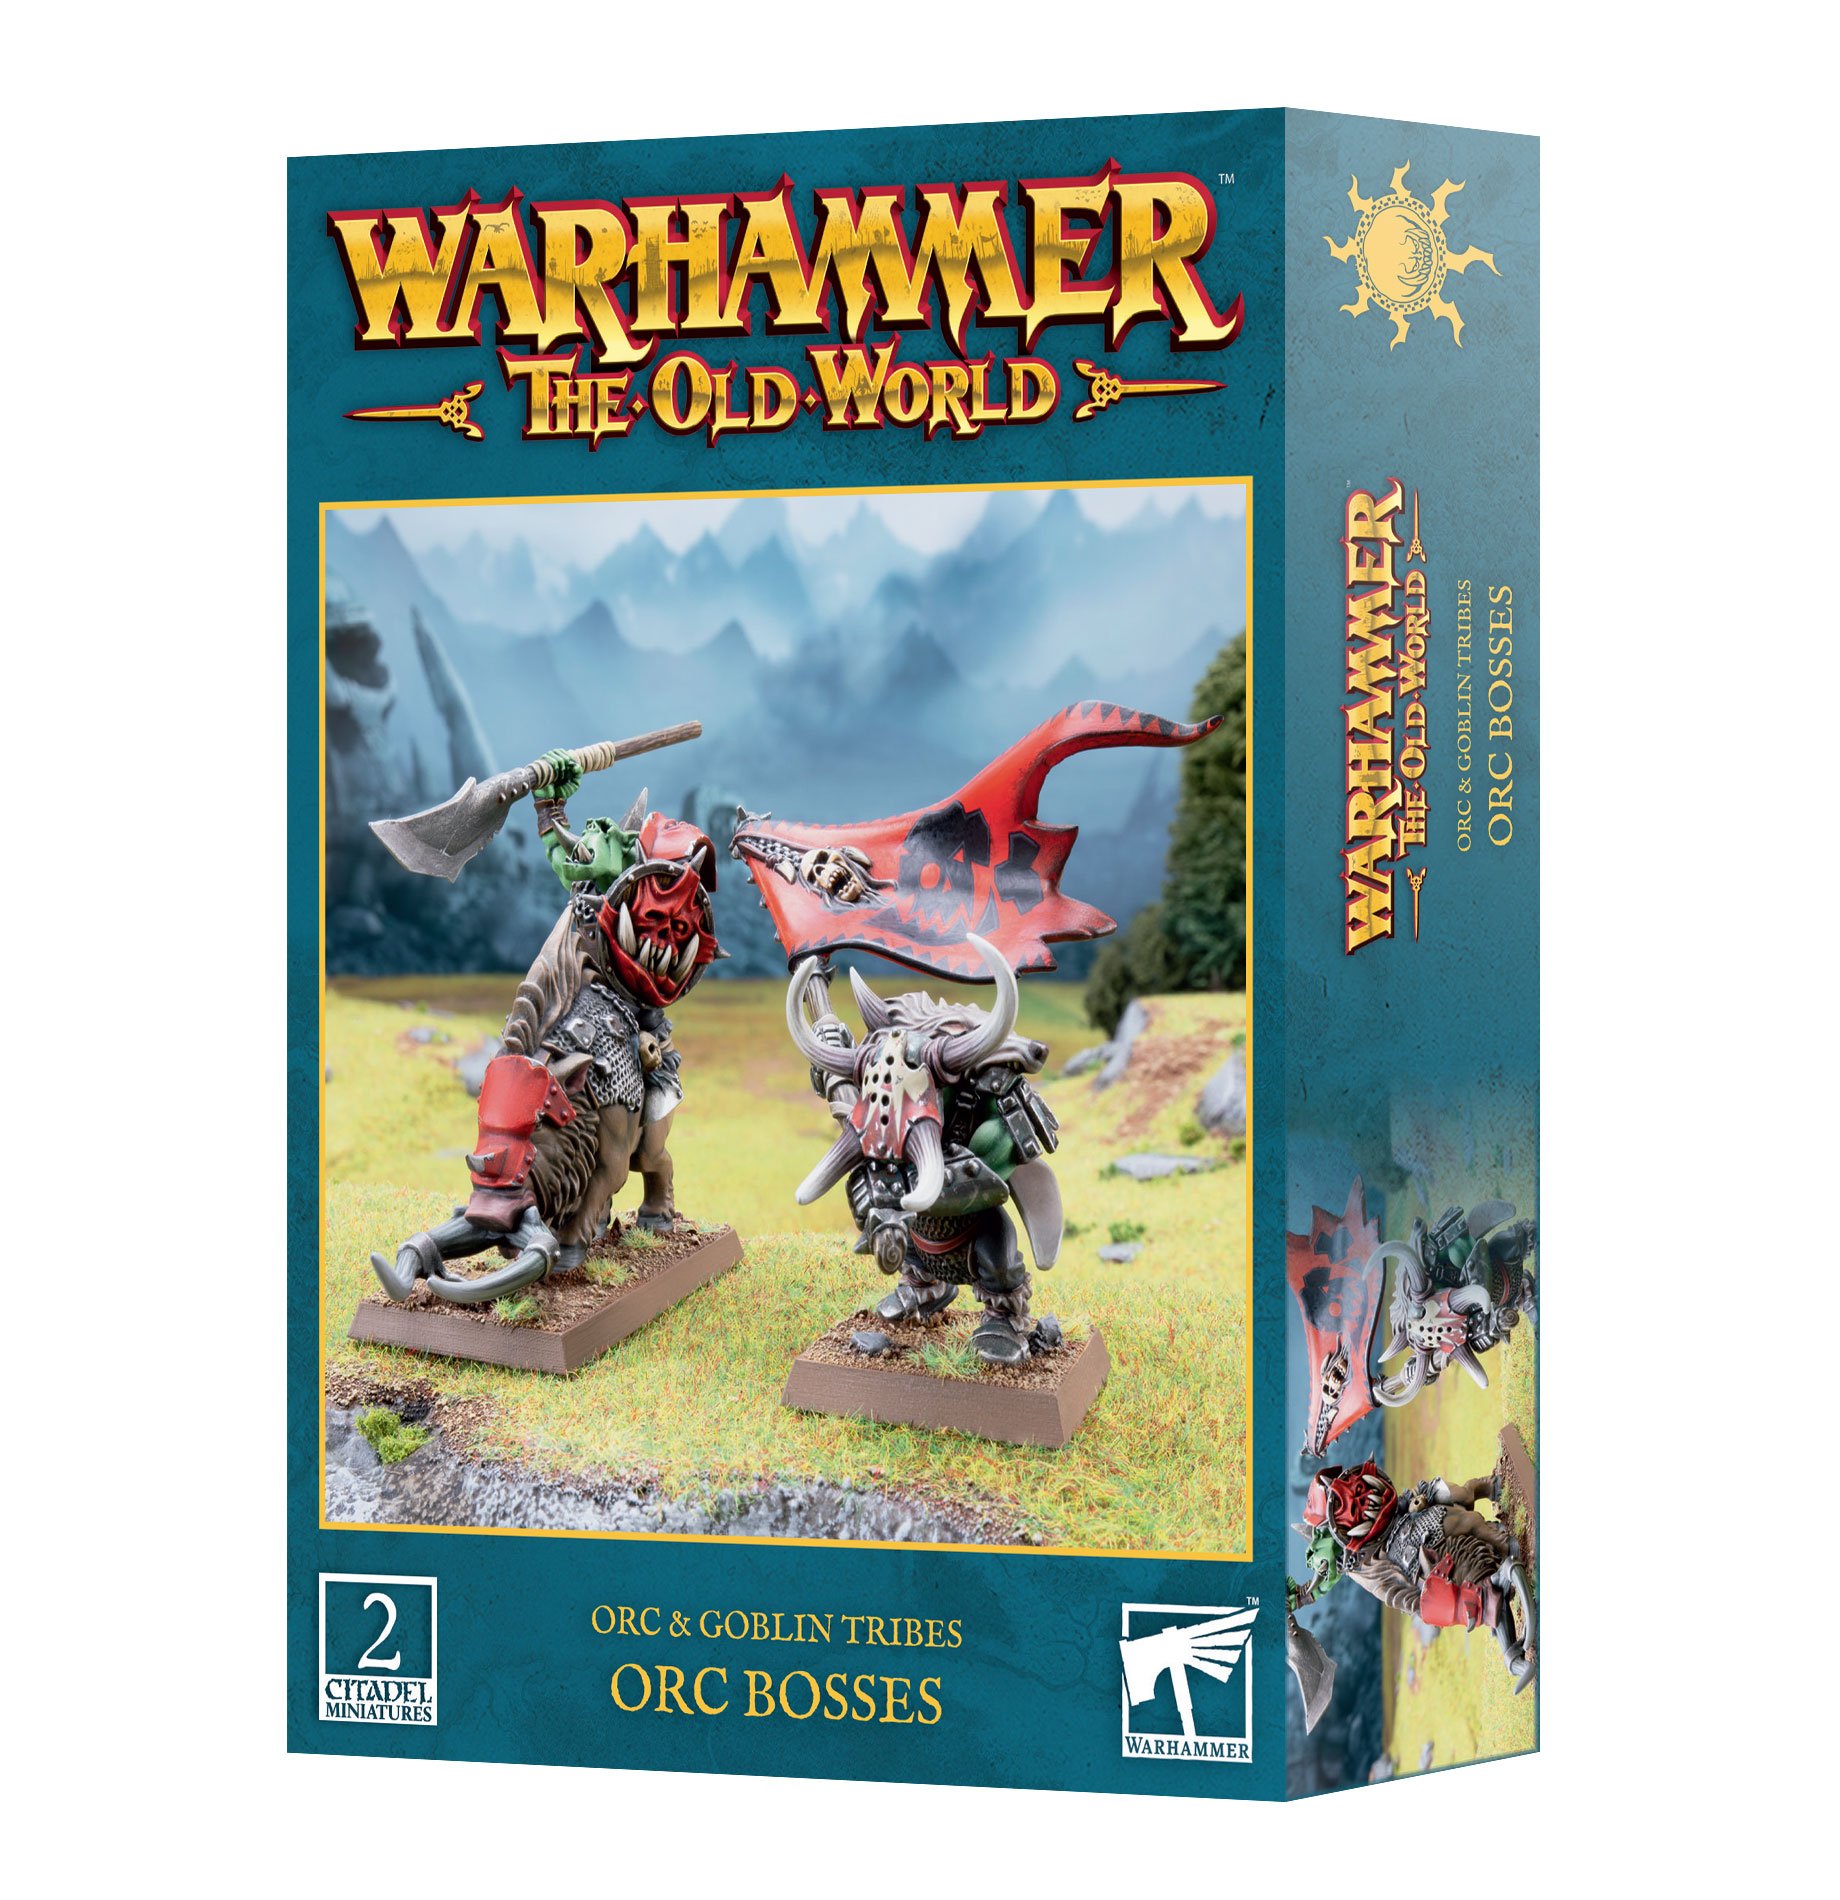 Chefs Orques - Orc & Goblin Tribes - 09-01 - Warhammer - The Old World